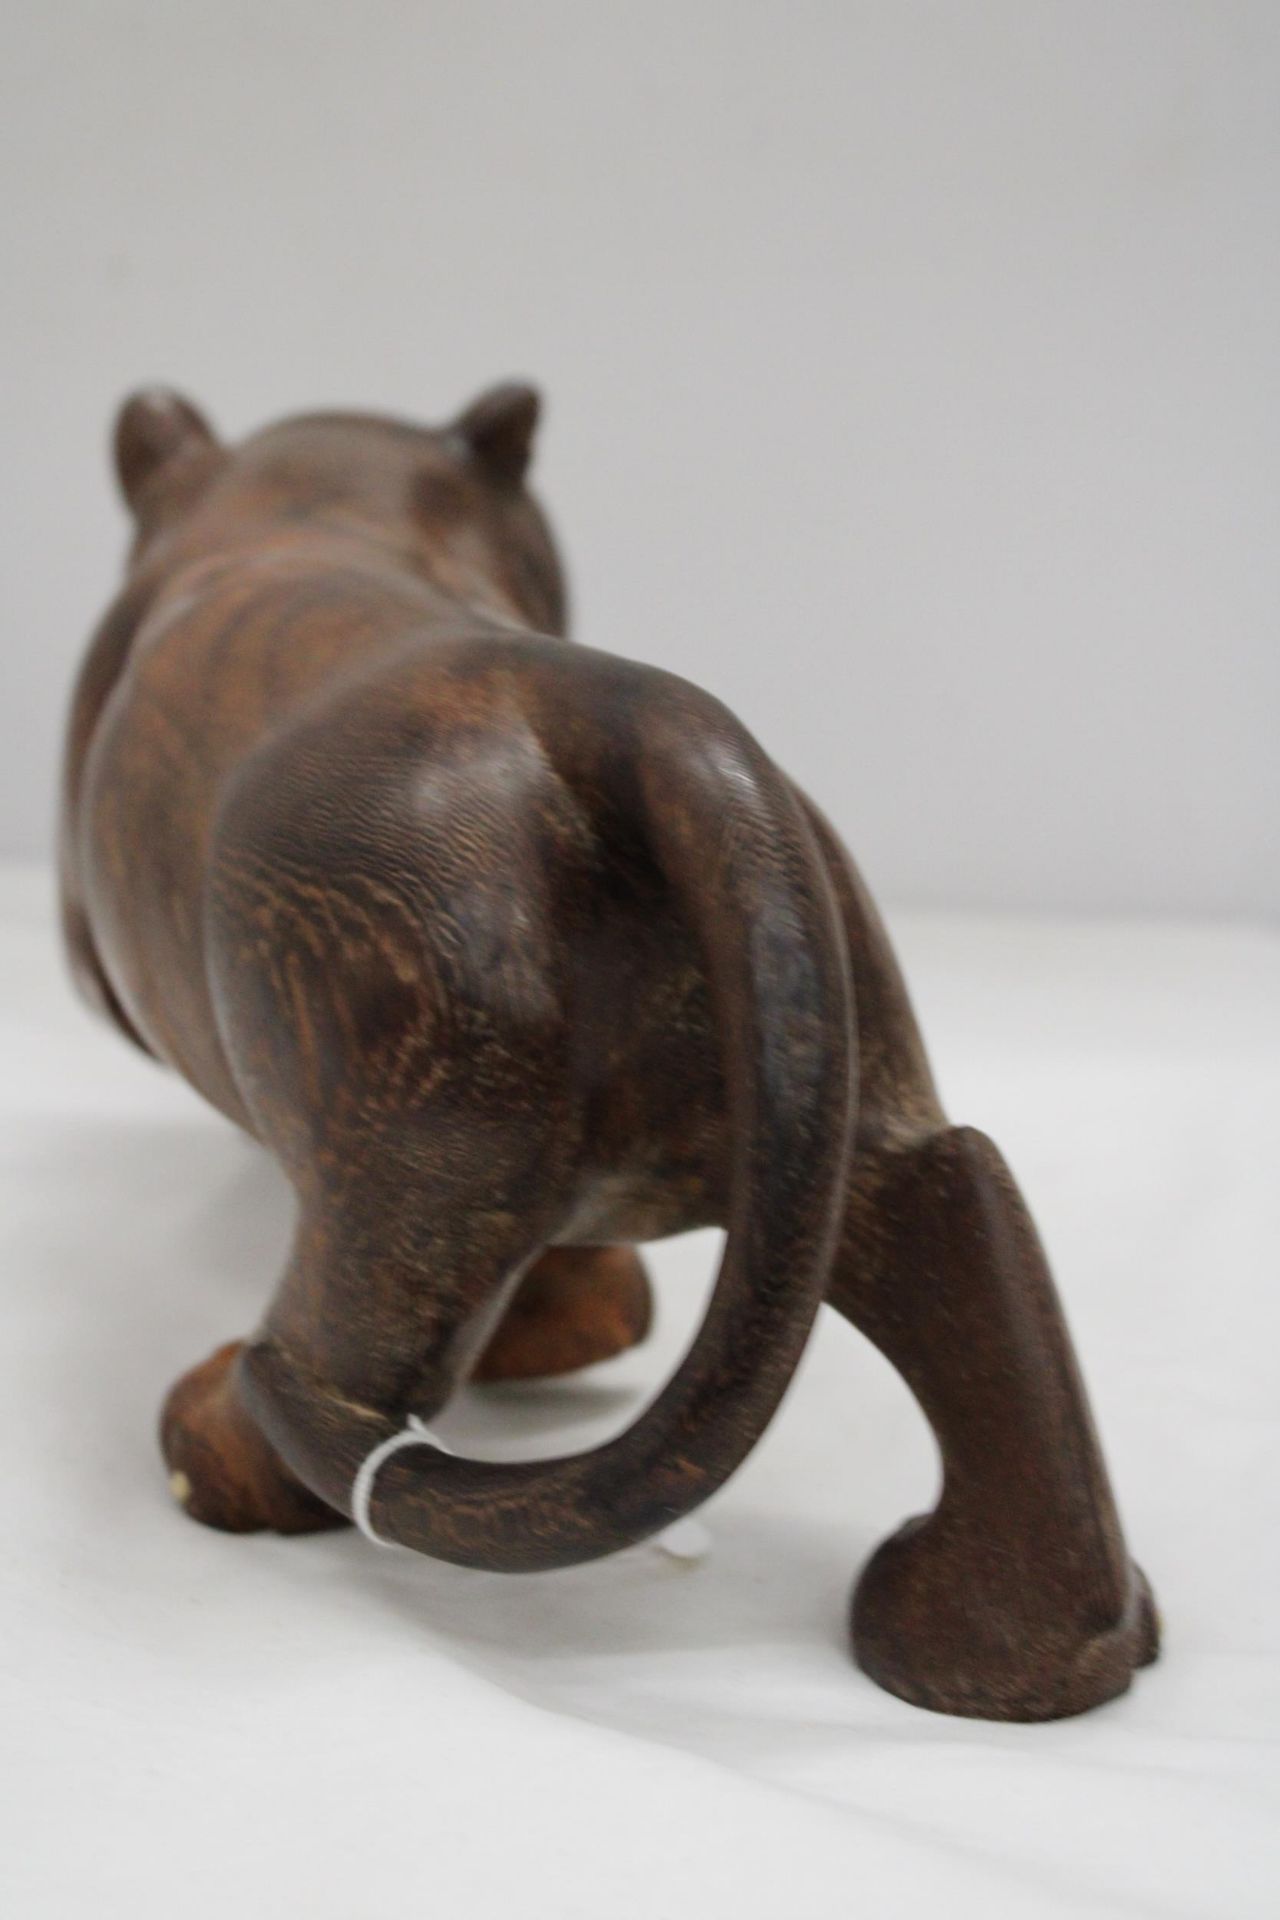 A CARVED HARD WOOD FIGURE OF A BIG CAT, HEIGHT 16CM, LENGTH 36CM - Image 5 of 5